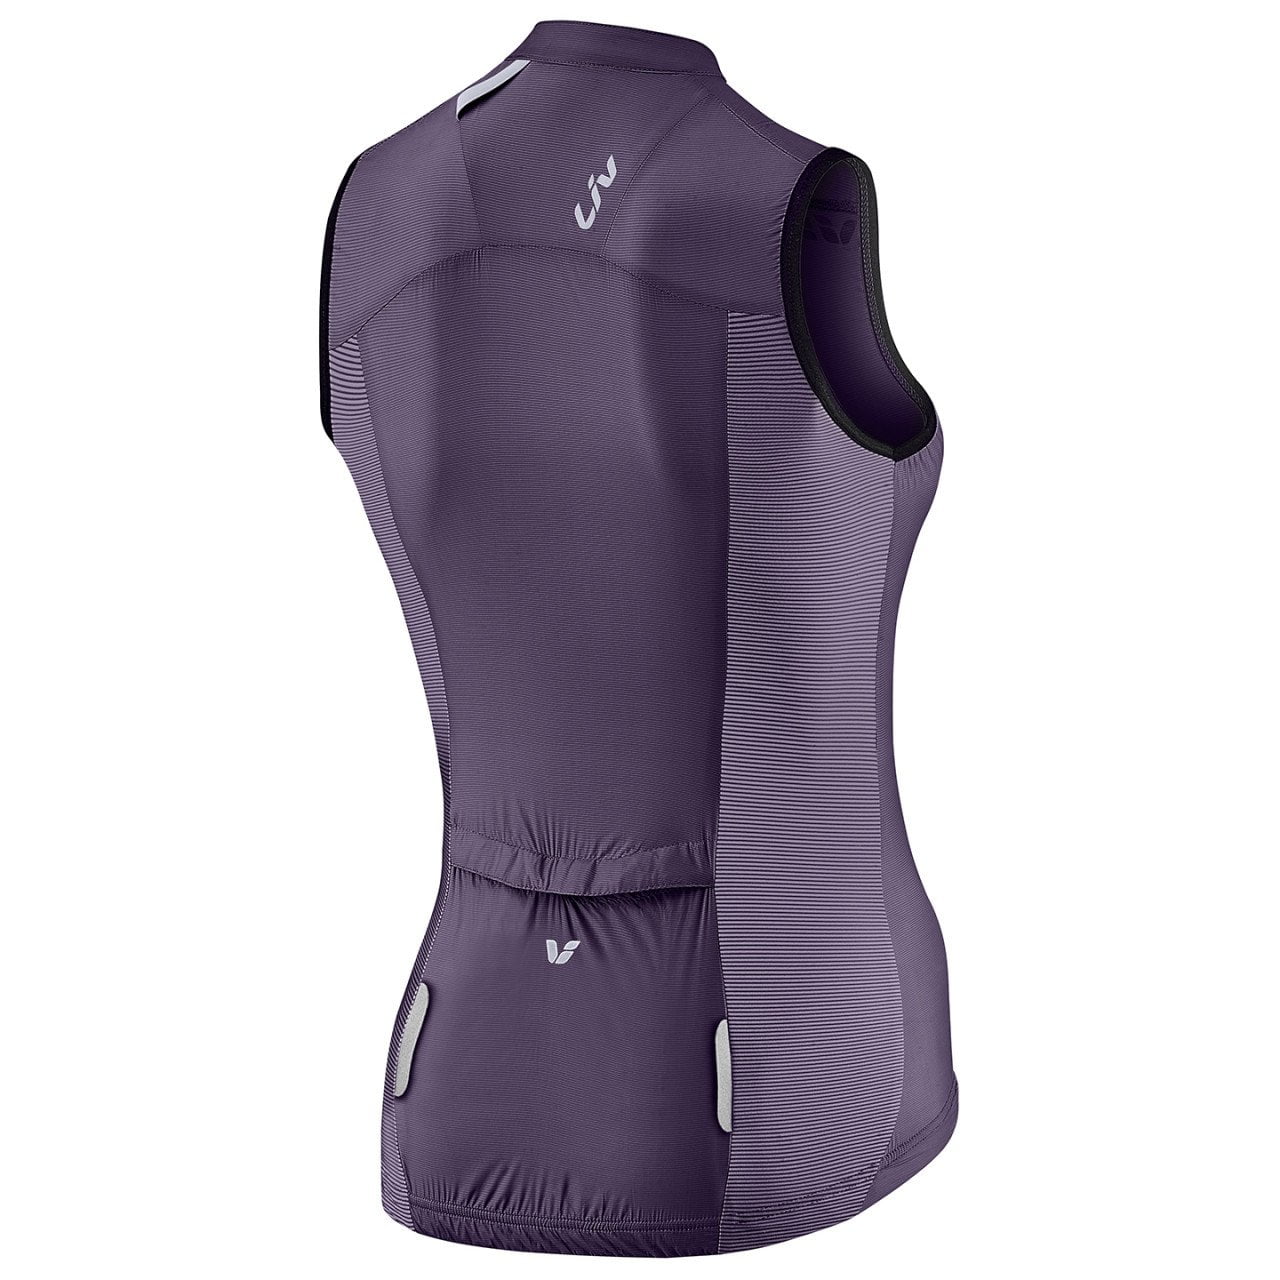 Gilet coupe-vent femme Cefira